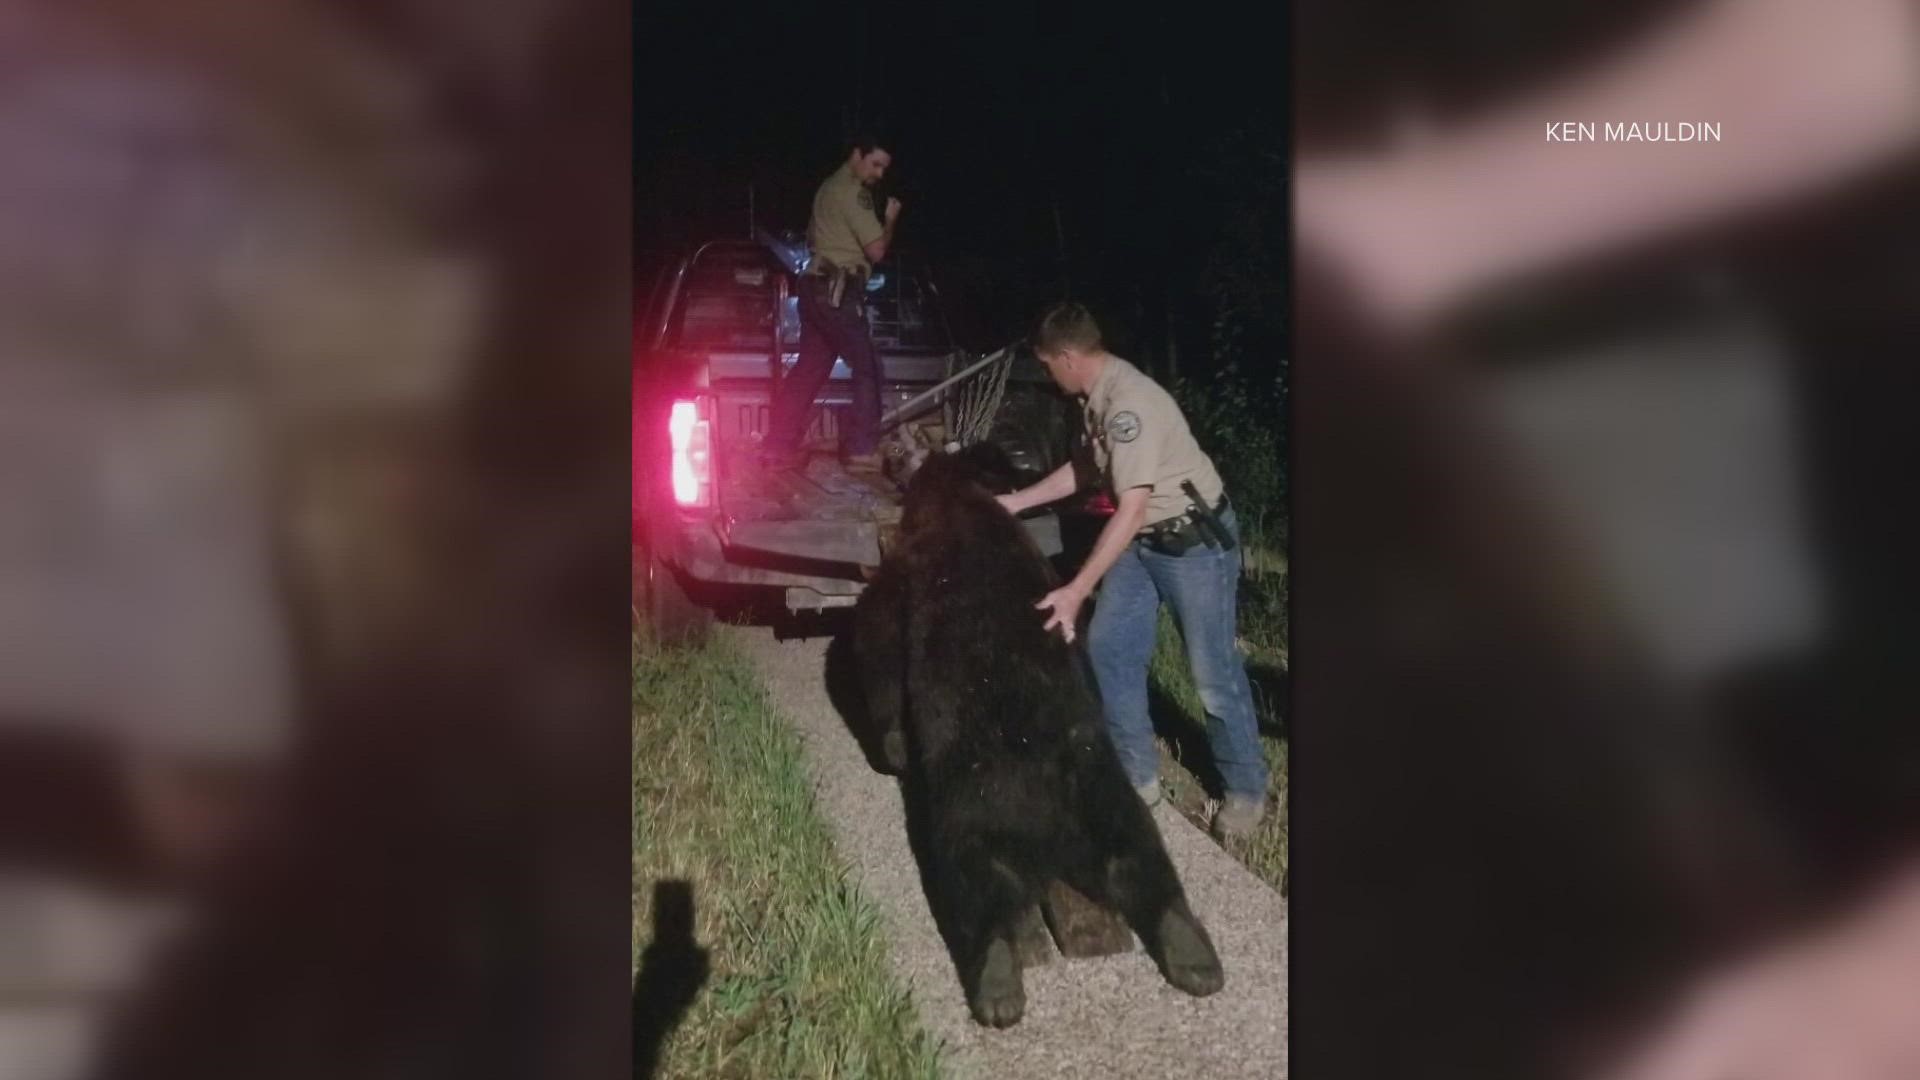 No humans were injured. CPW says that the homeowner had the legal right to shoot the bear if he felt threatened.